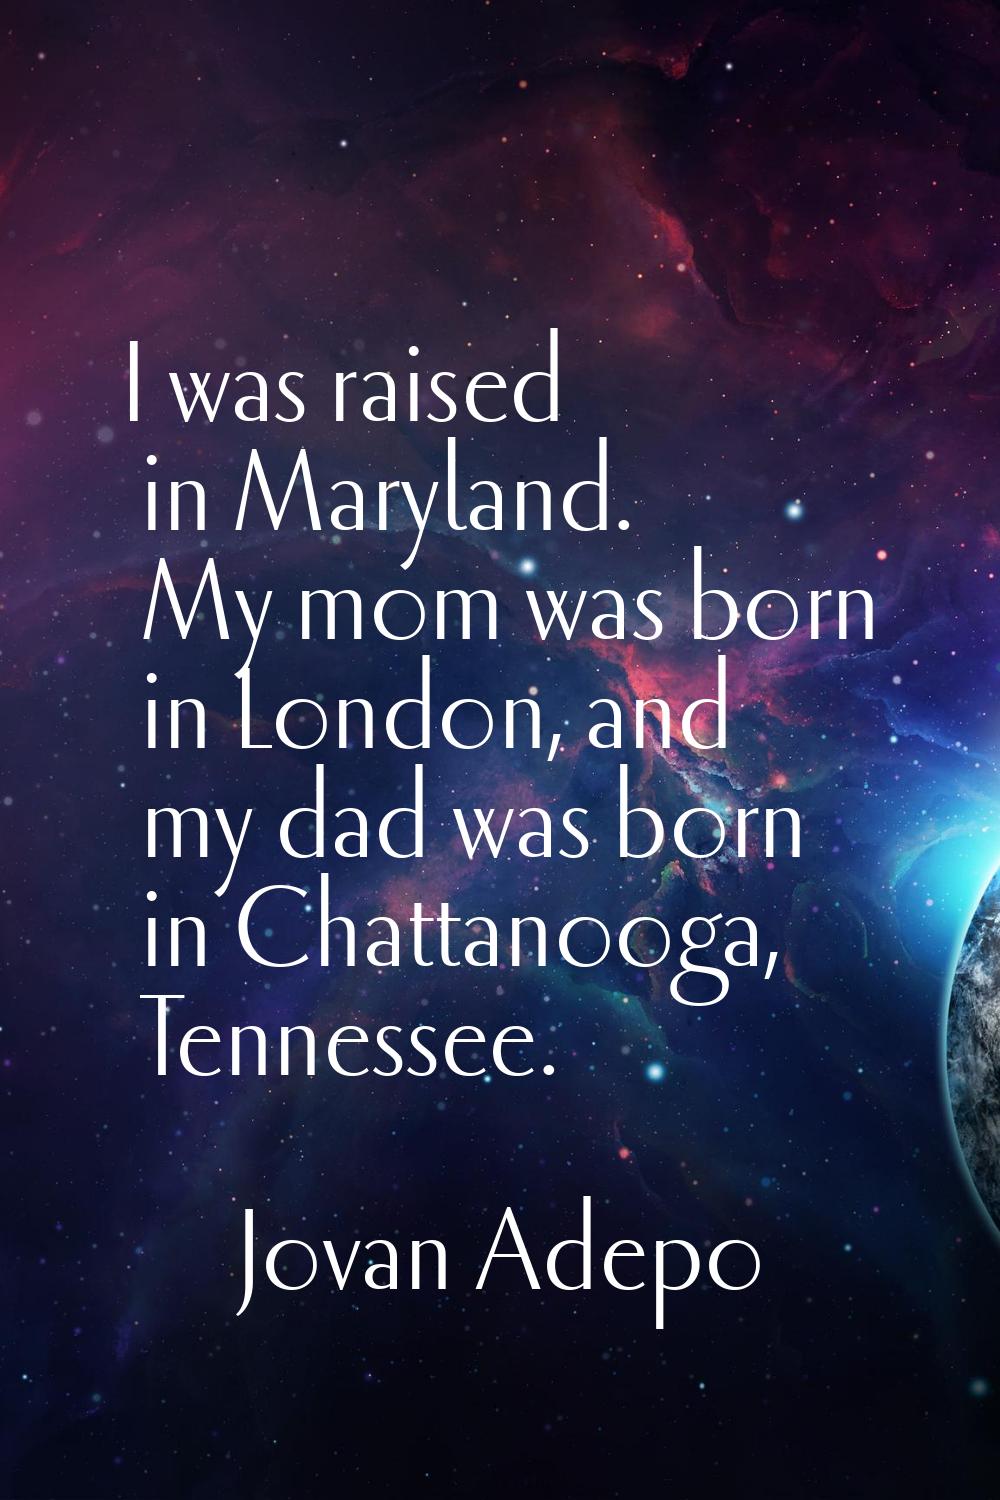 I was raised in Maryland. My mom was born in London, and my dad was born in Chattanooga, Tennessee.